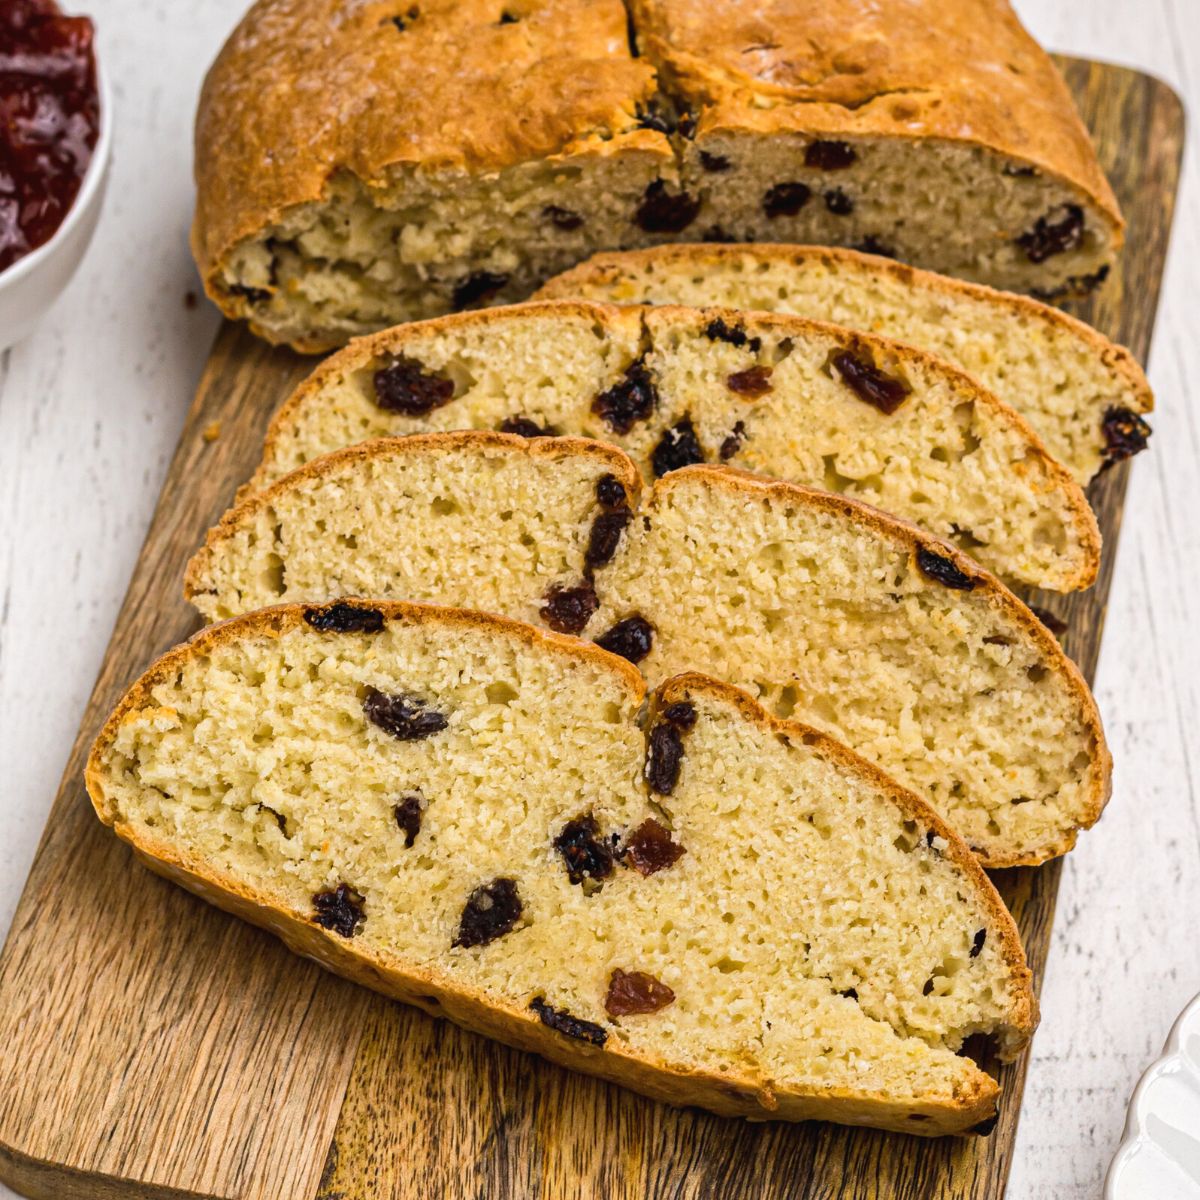 Golden Irish Soda bread filled with raisins, slices on a wooden cutting board.